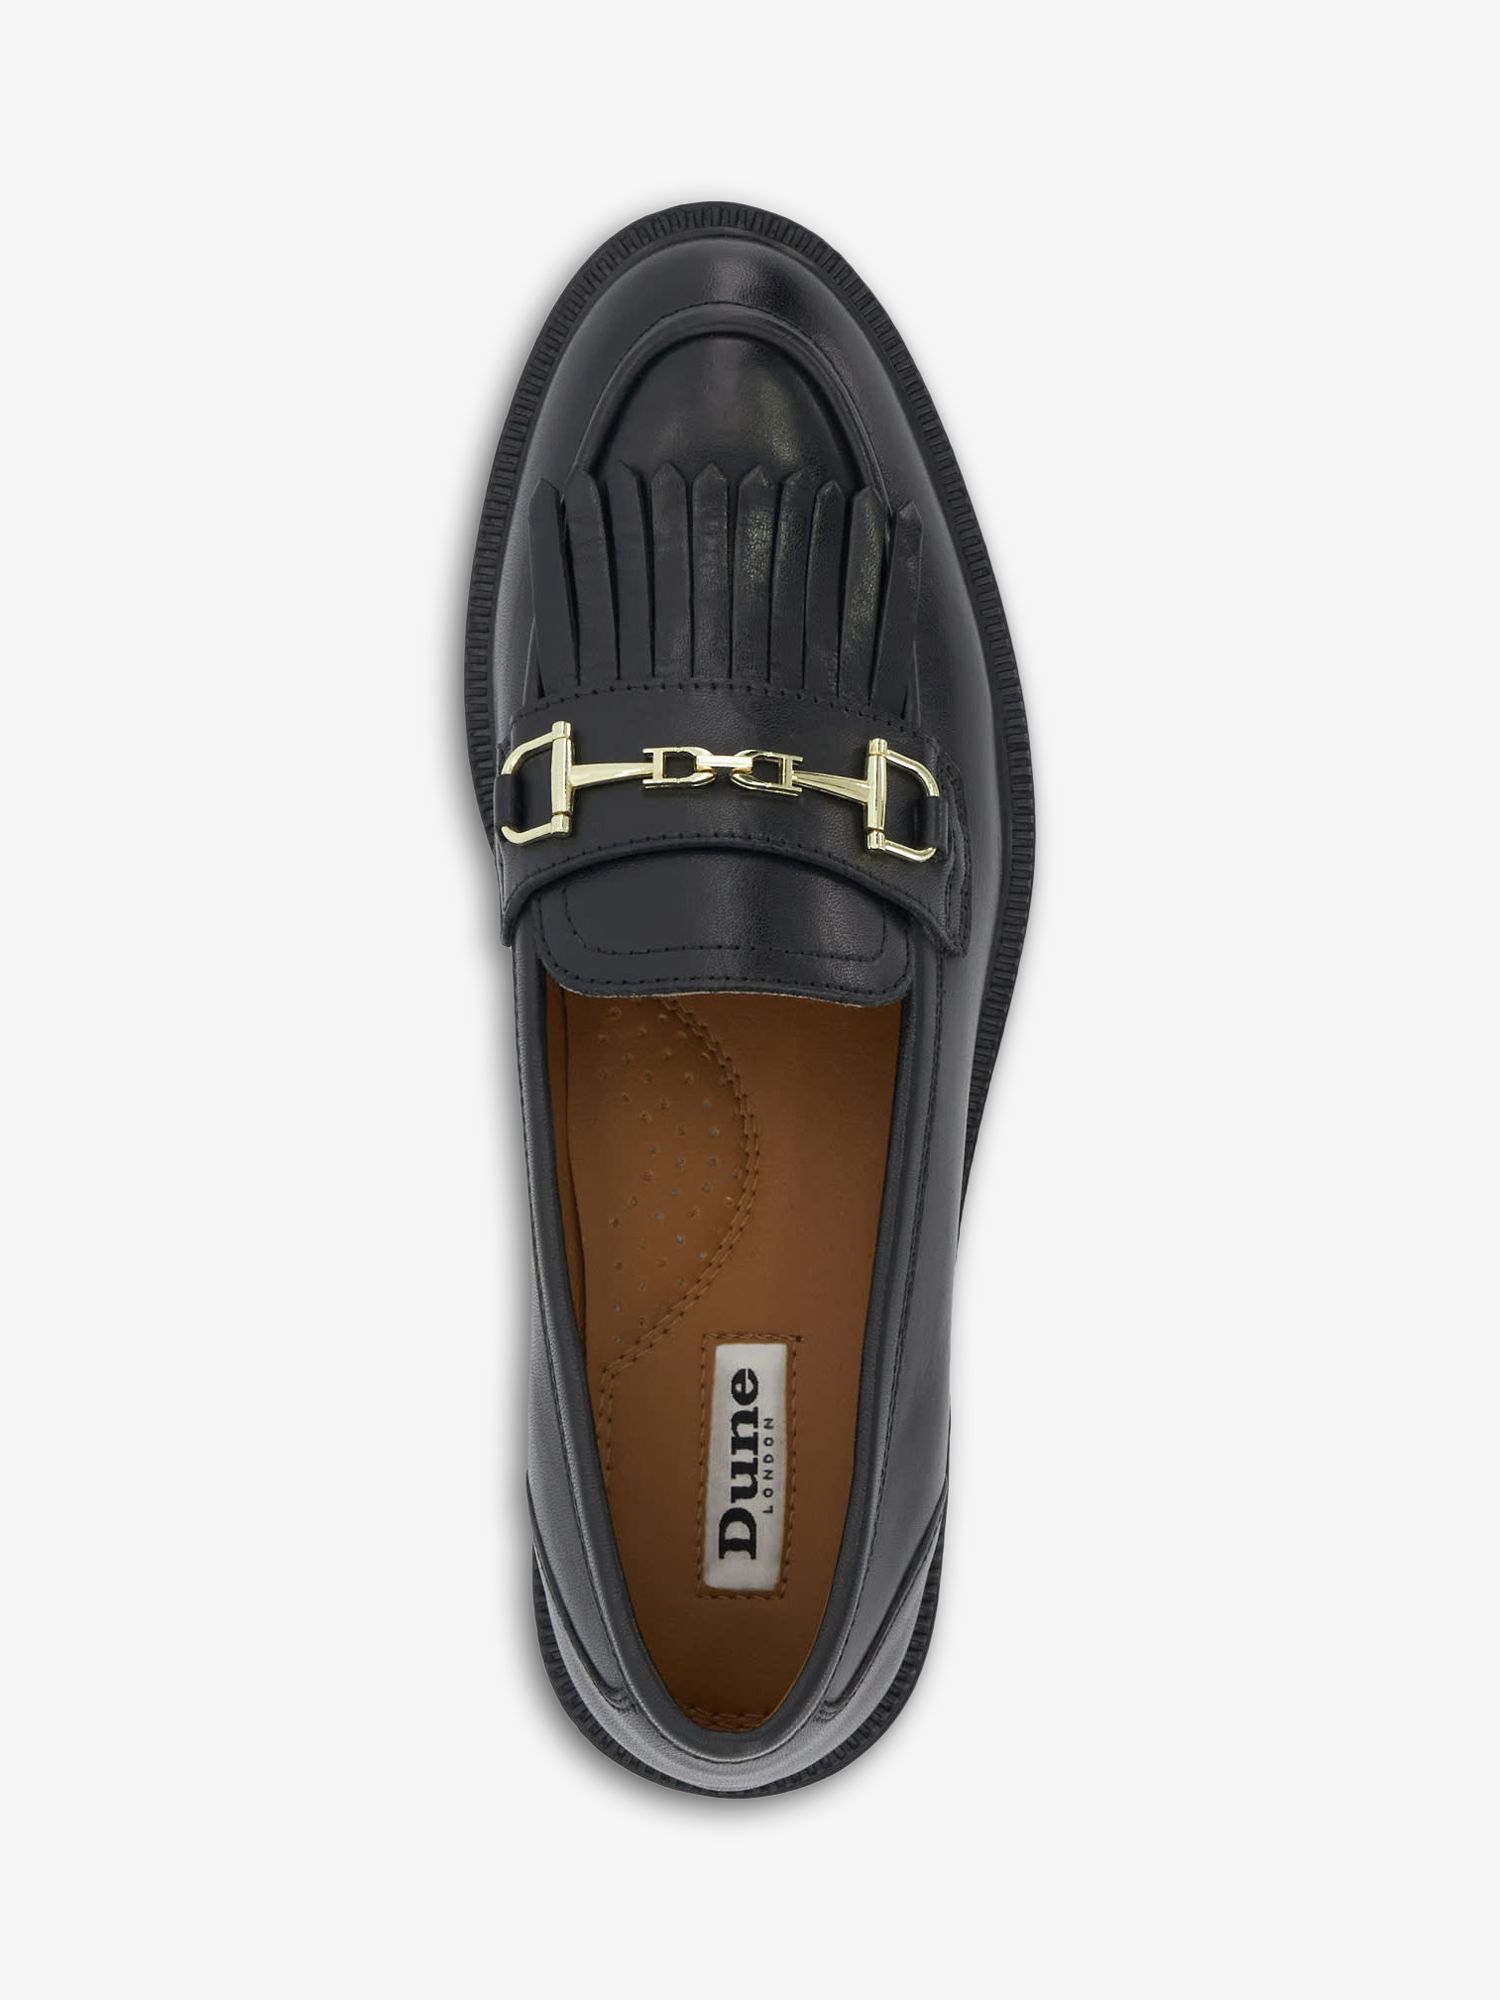 Buy Dune Guided Leather Snaffle Fringe Loafers Online at johnlewis.com